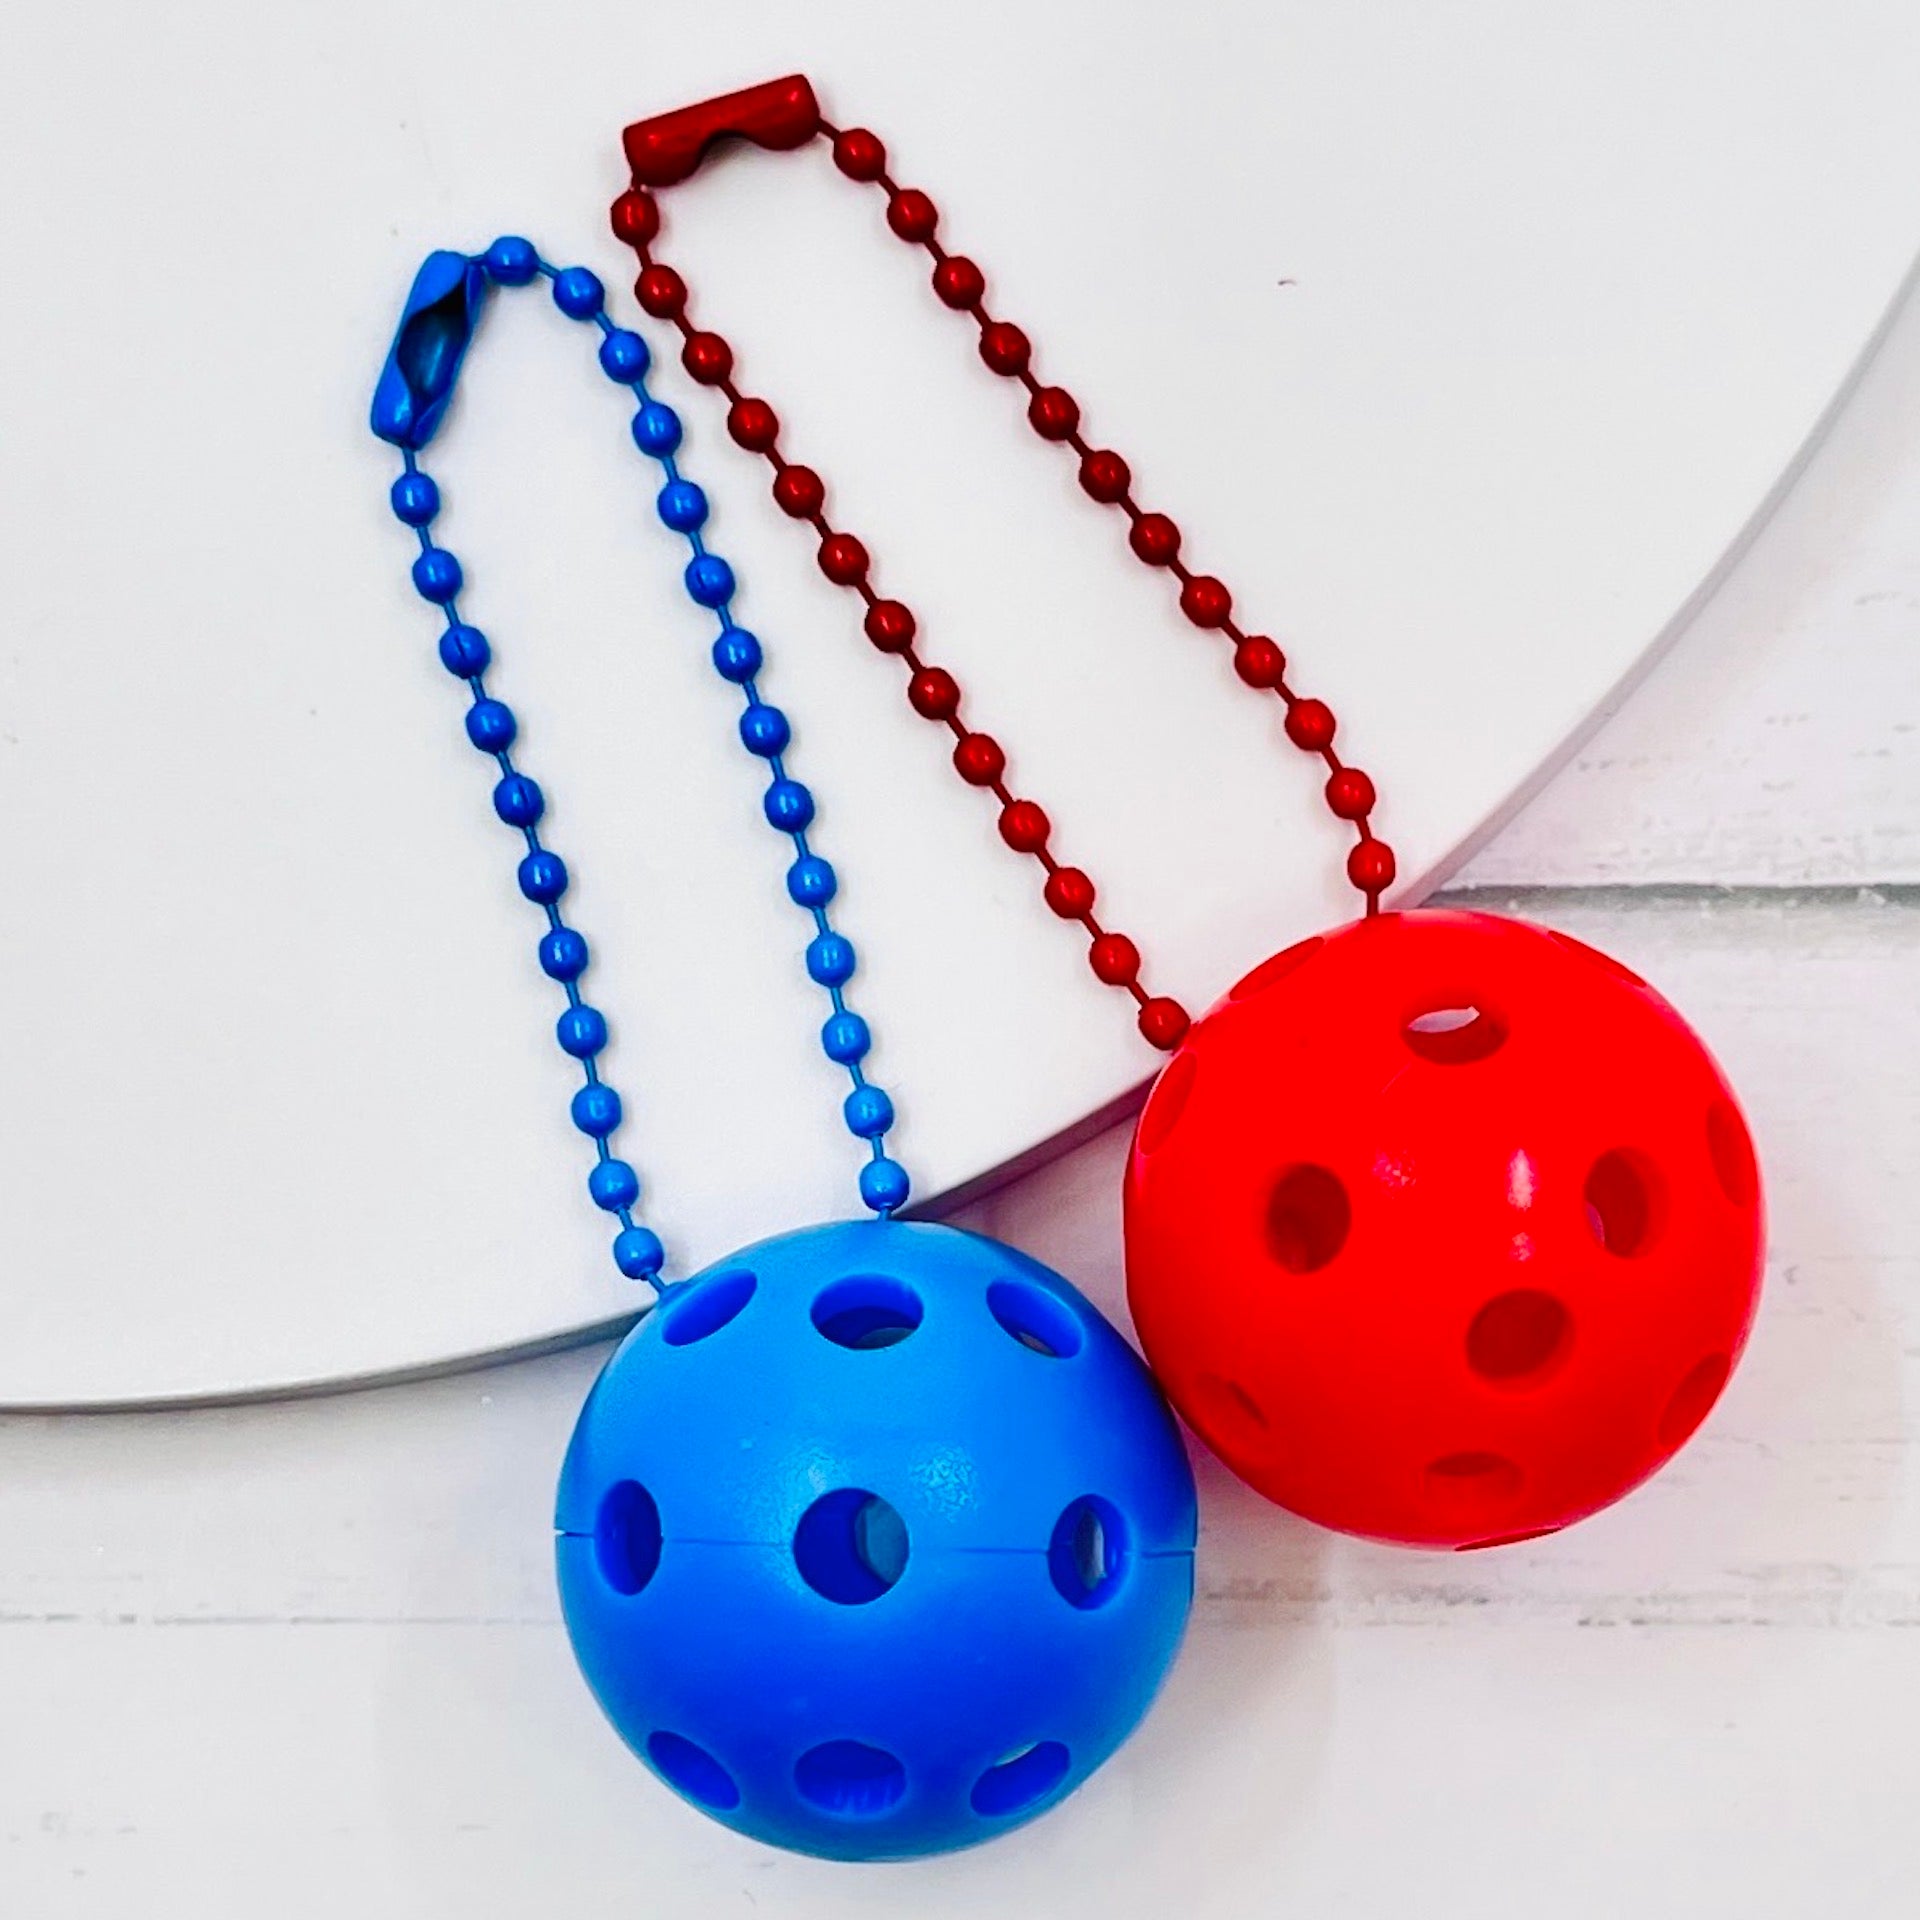 Micro Pickleball Bag Tags/Pulls (Set of 2)  Each order gets you 2 of the cutest little pickleball and chain! They measure about 1 inch and are used as bag tag markers. Fun for any bag, especially your pickleball bag!! The balls come in 4 colors: Red, Green, Blue, and Yellow. They now also come with matching chain colors!! Choose from 4 fun colors.